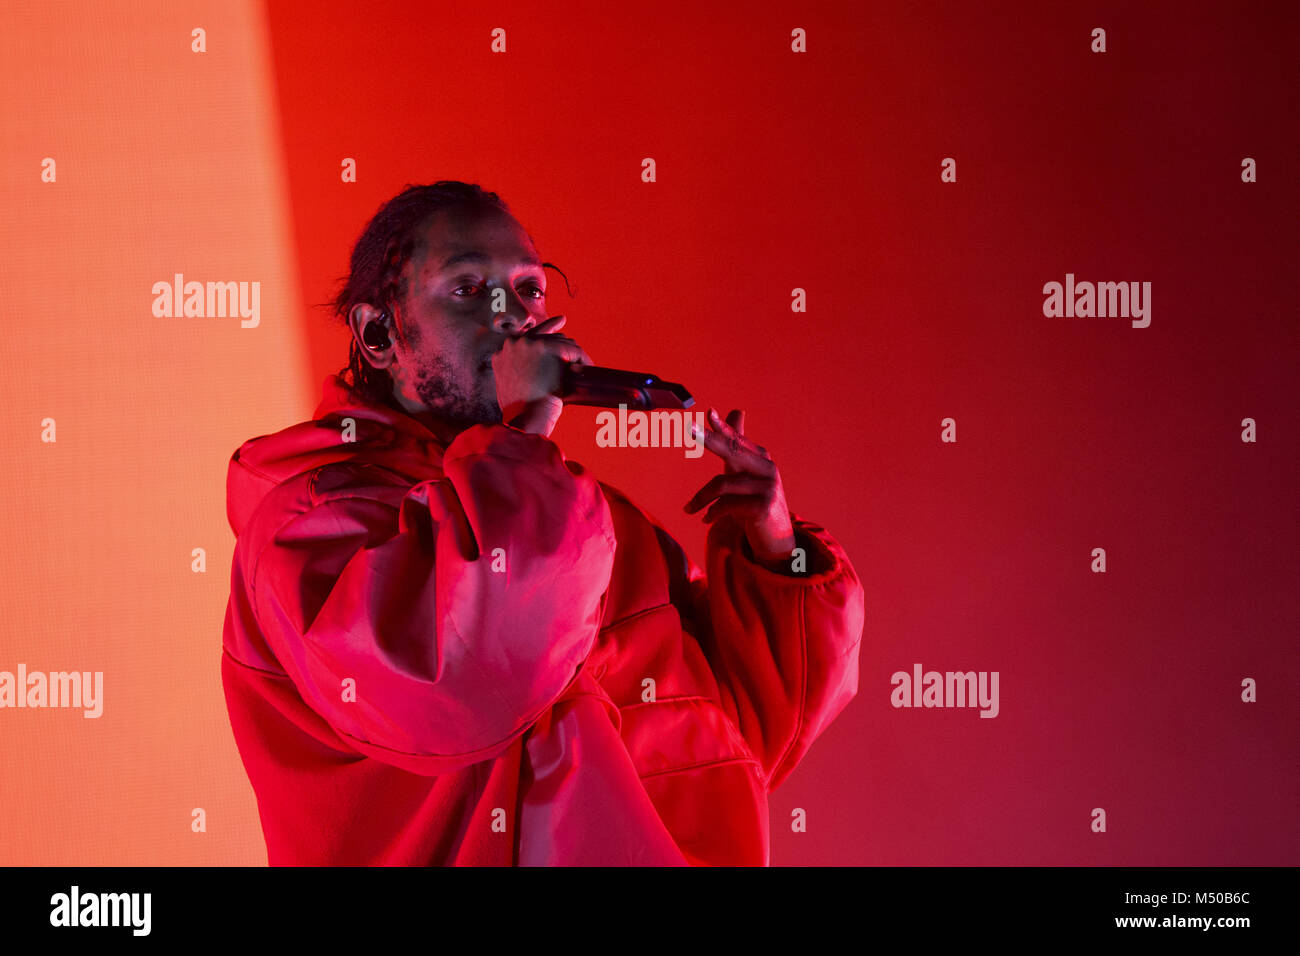 Los Angeles, CA, USA. 16th Feb, 2018. Fans react as artist Kendrick Lamar  performs at L.A. Live during the NBA All-Stars weekend road show concert on  Friday, February 16, 2018 in downtown